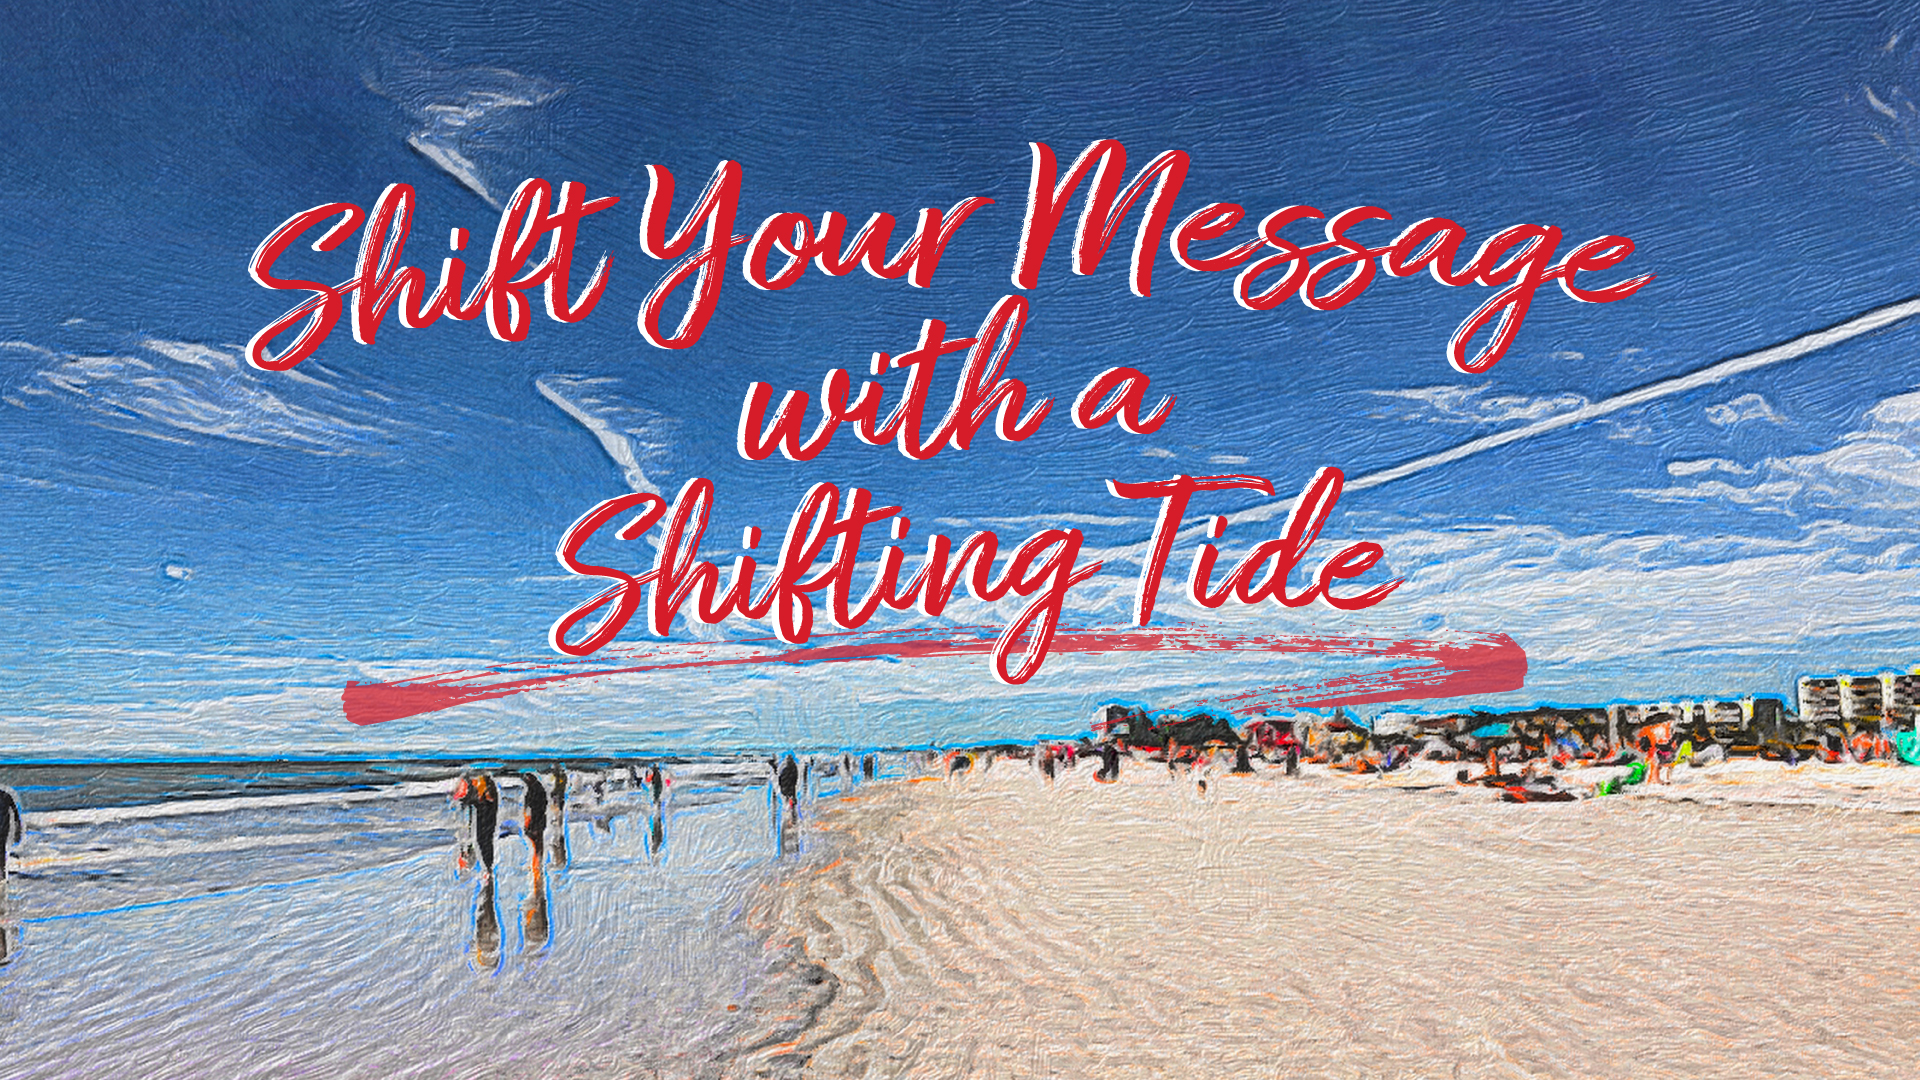 January FPRA Event - Shift Your Message with a Shifting Tide